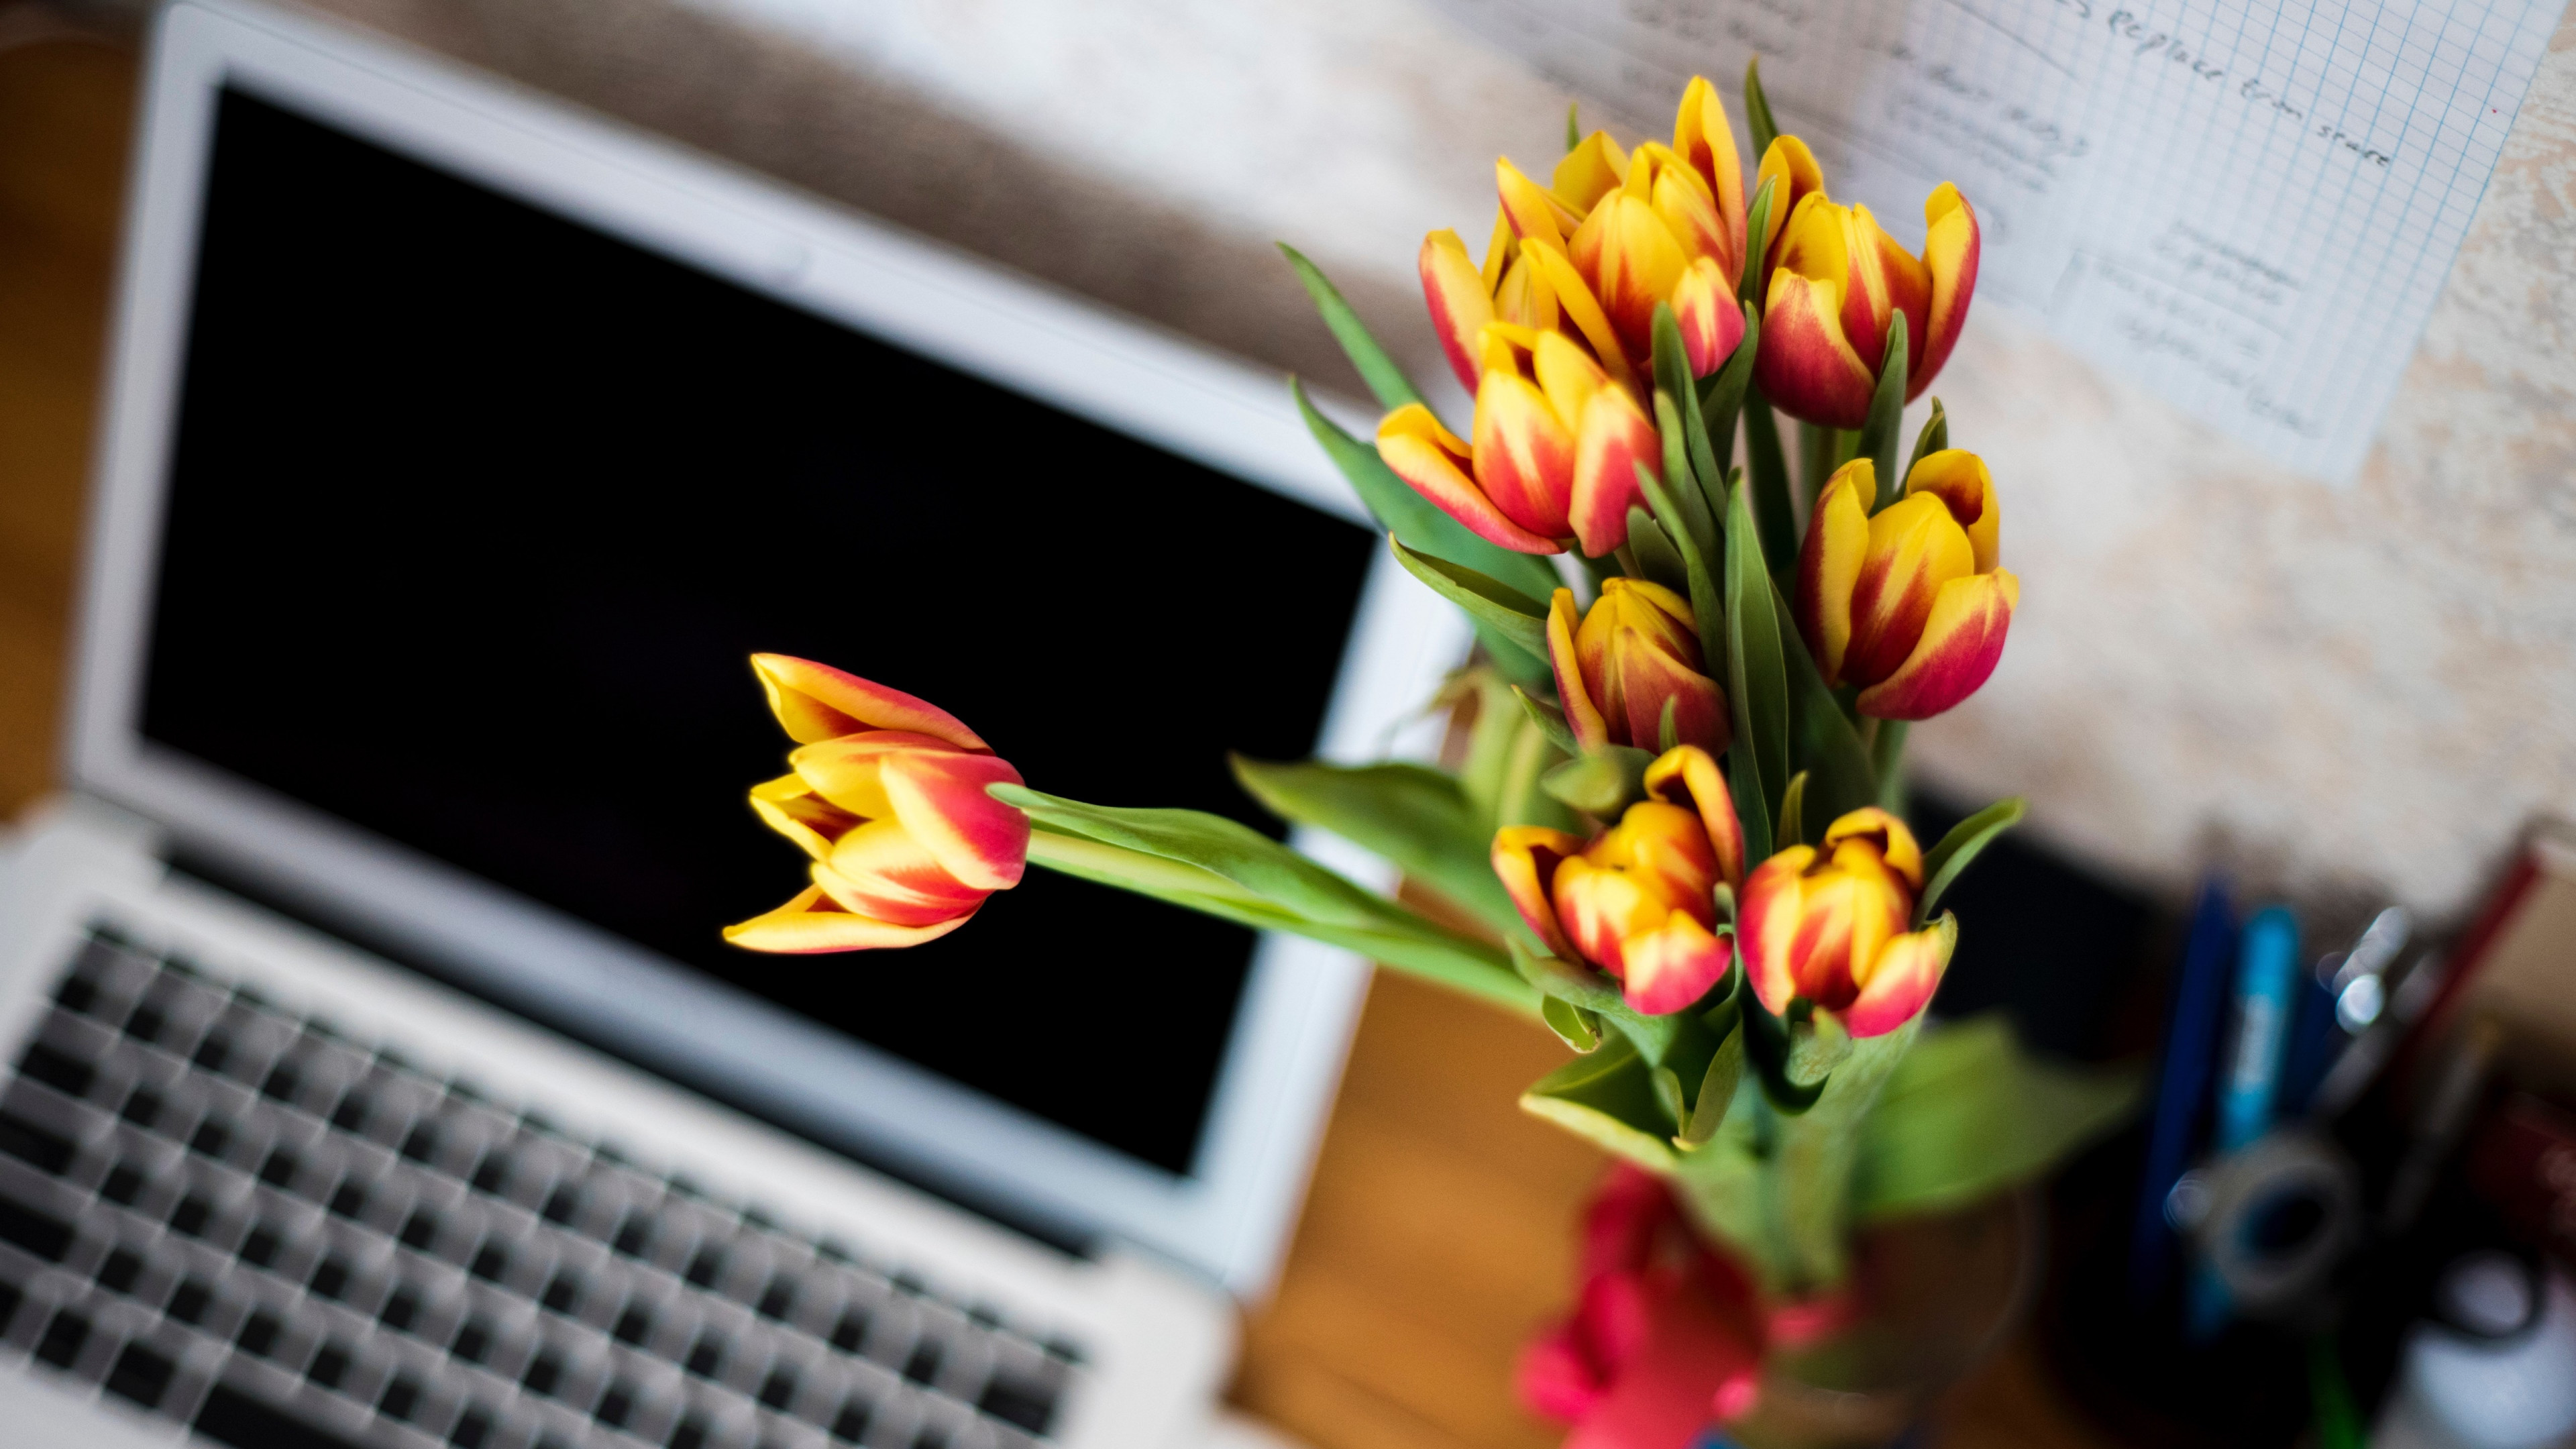 Laptop and tulips bouquet wallpaper 3840x2160